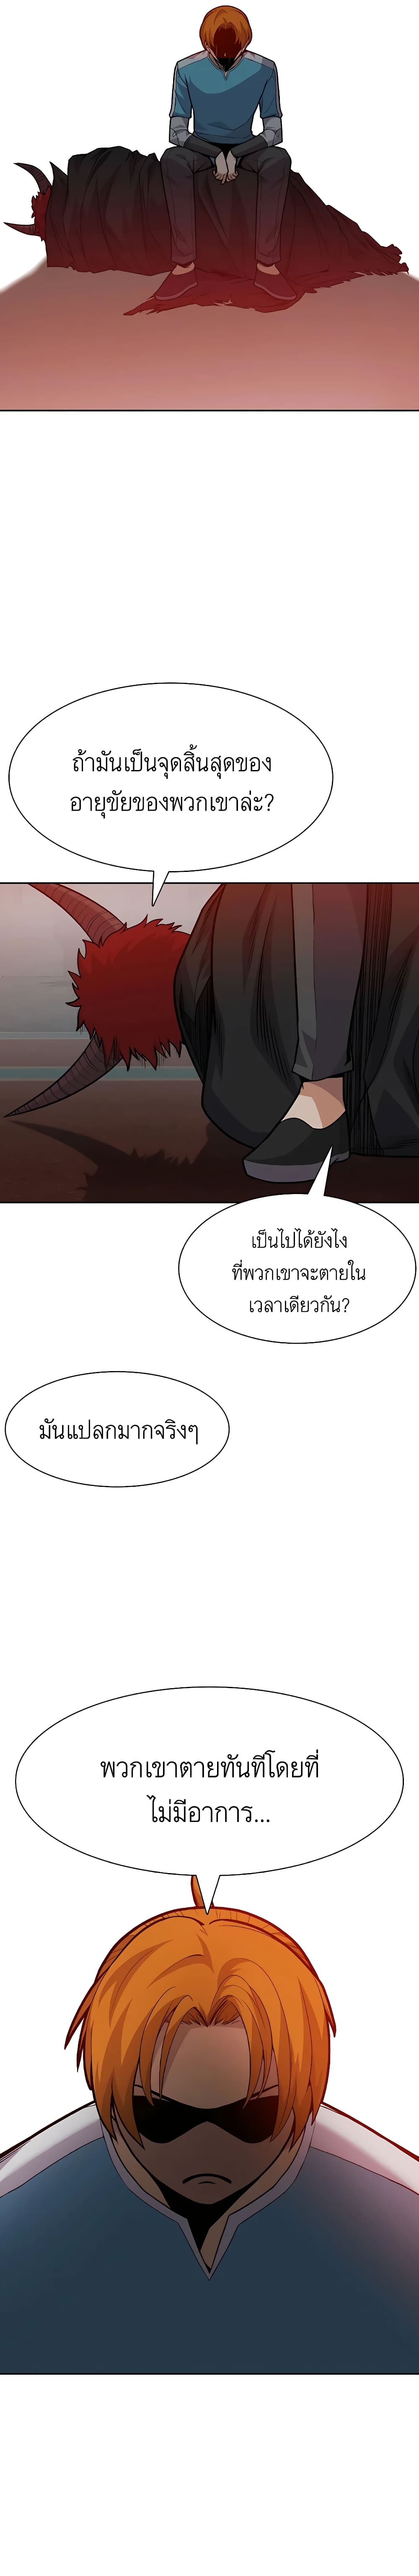 Raising Newbie Heroes In Another World ตอนที่ 30 (16)